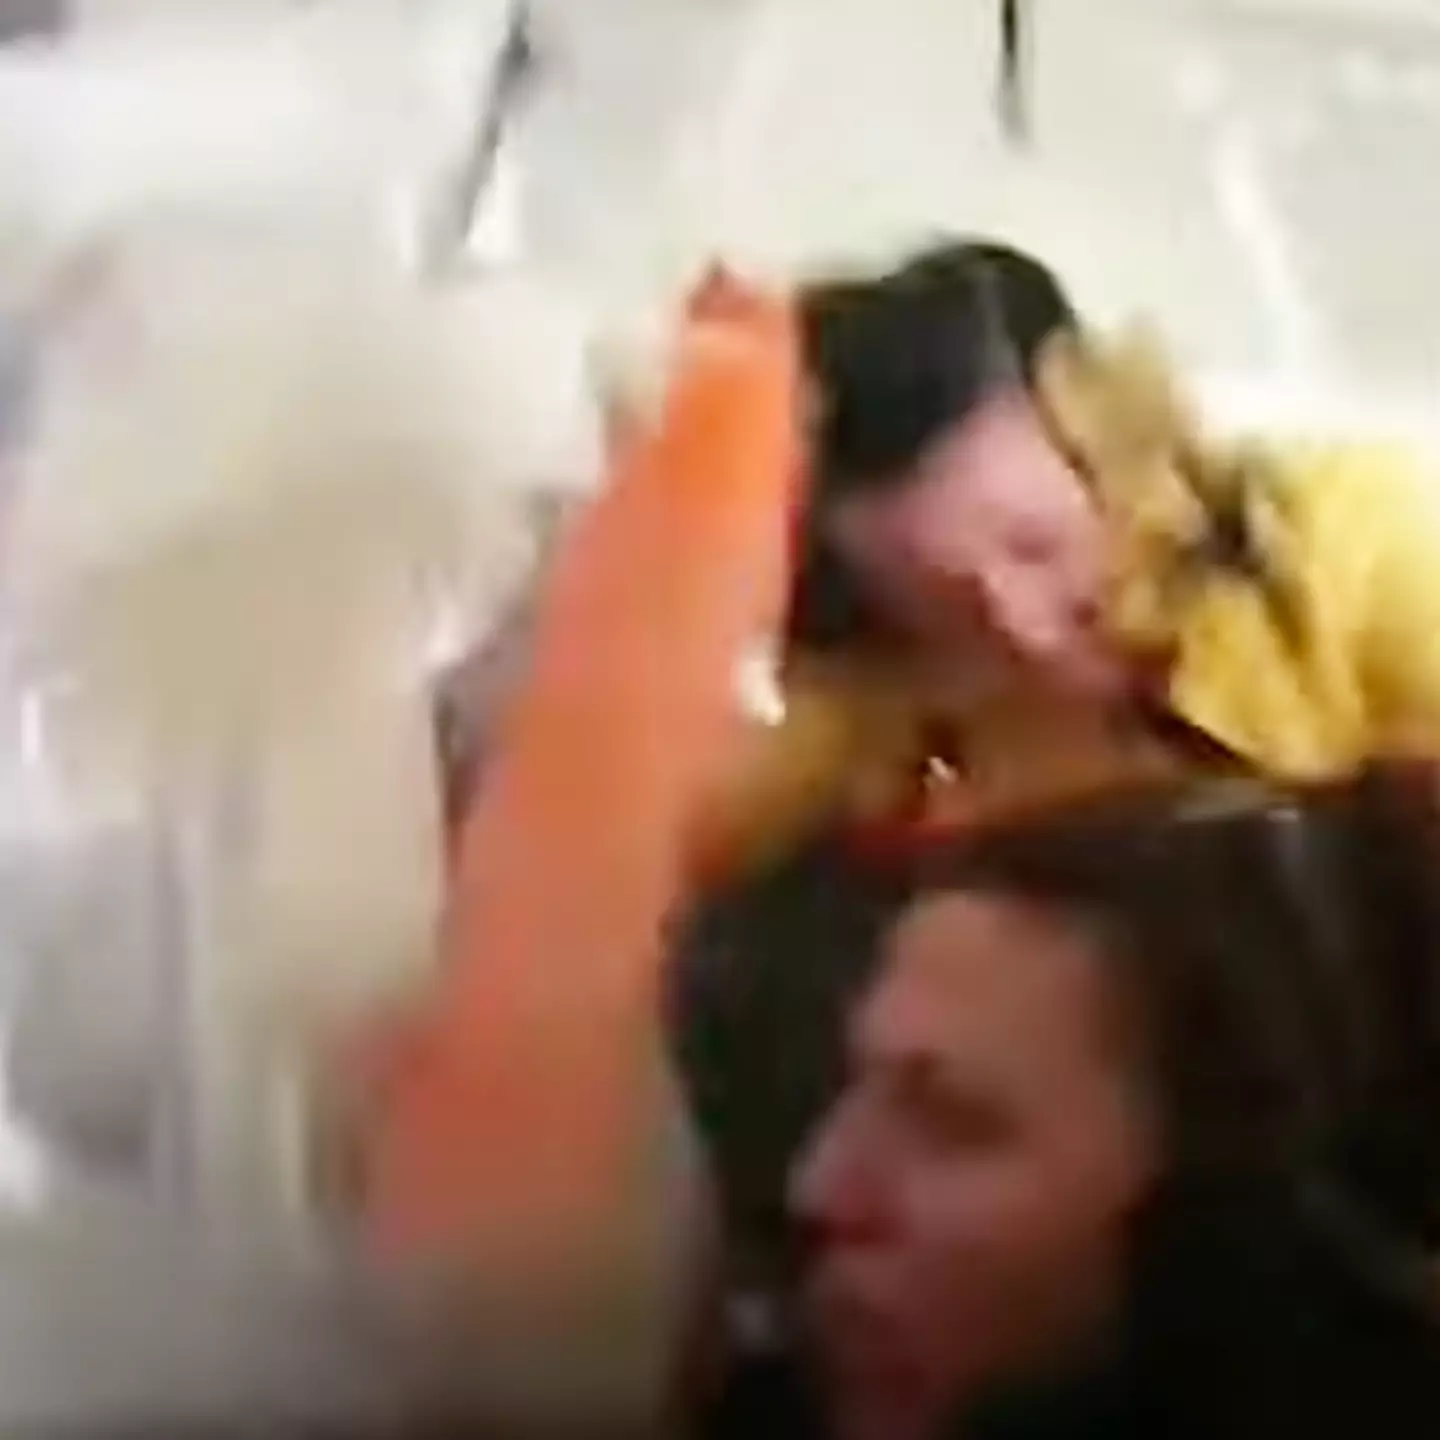 'Terrifying' footage shows most 'violent' turbulence ever